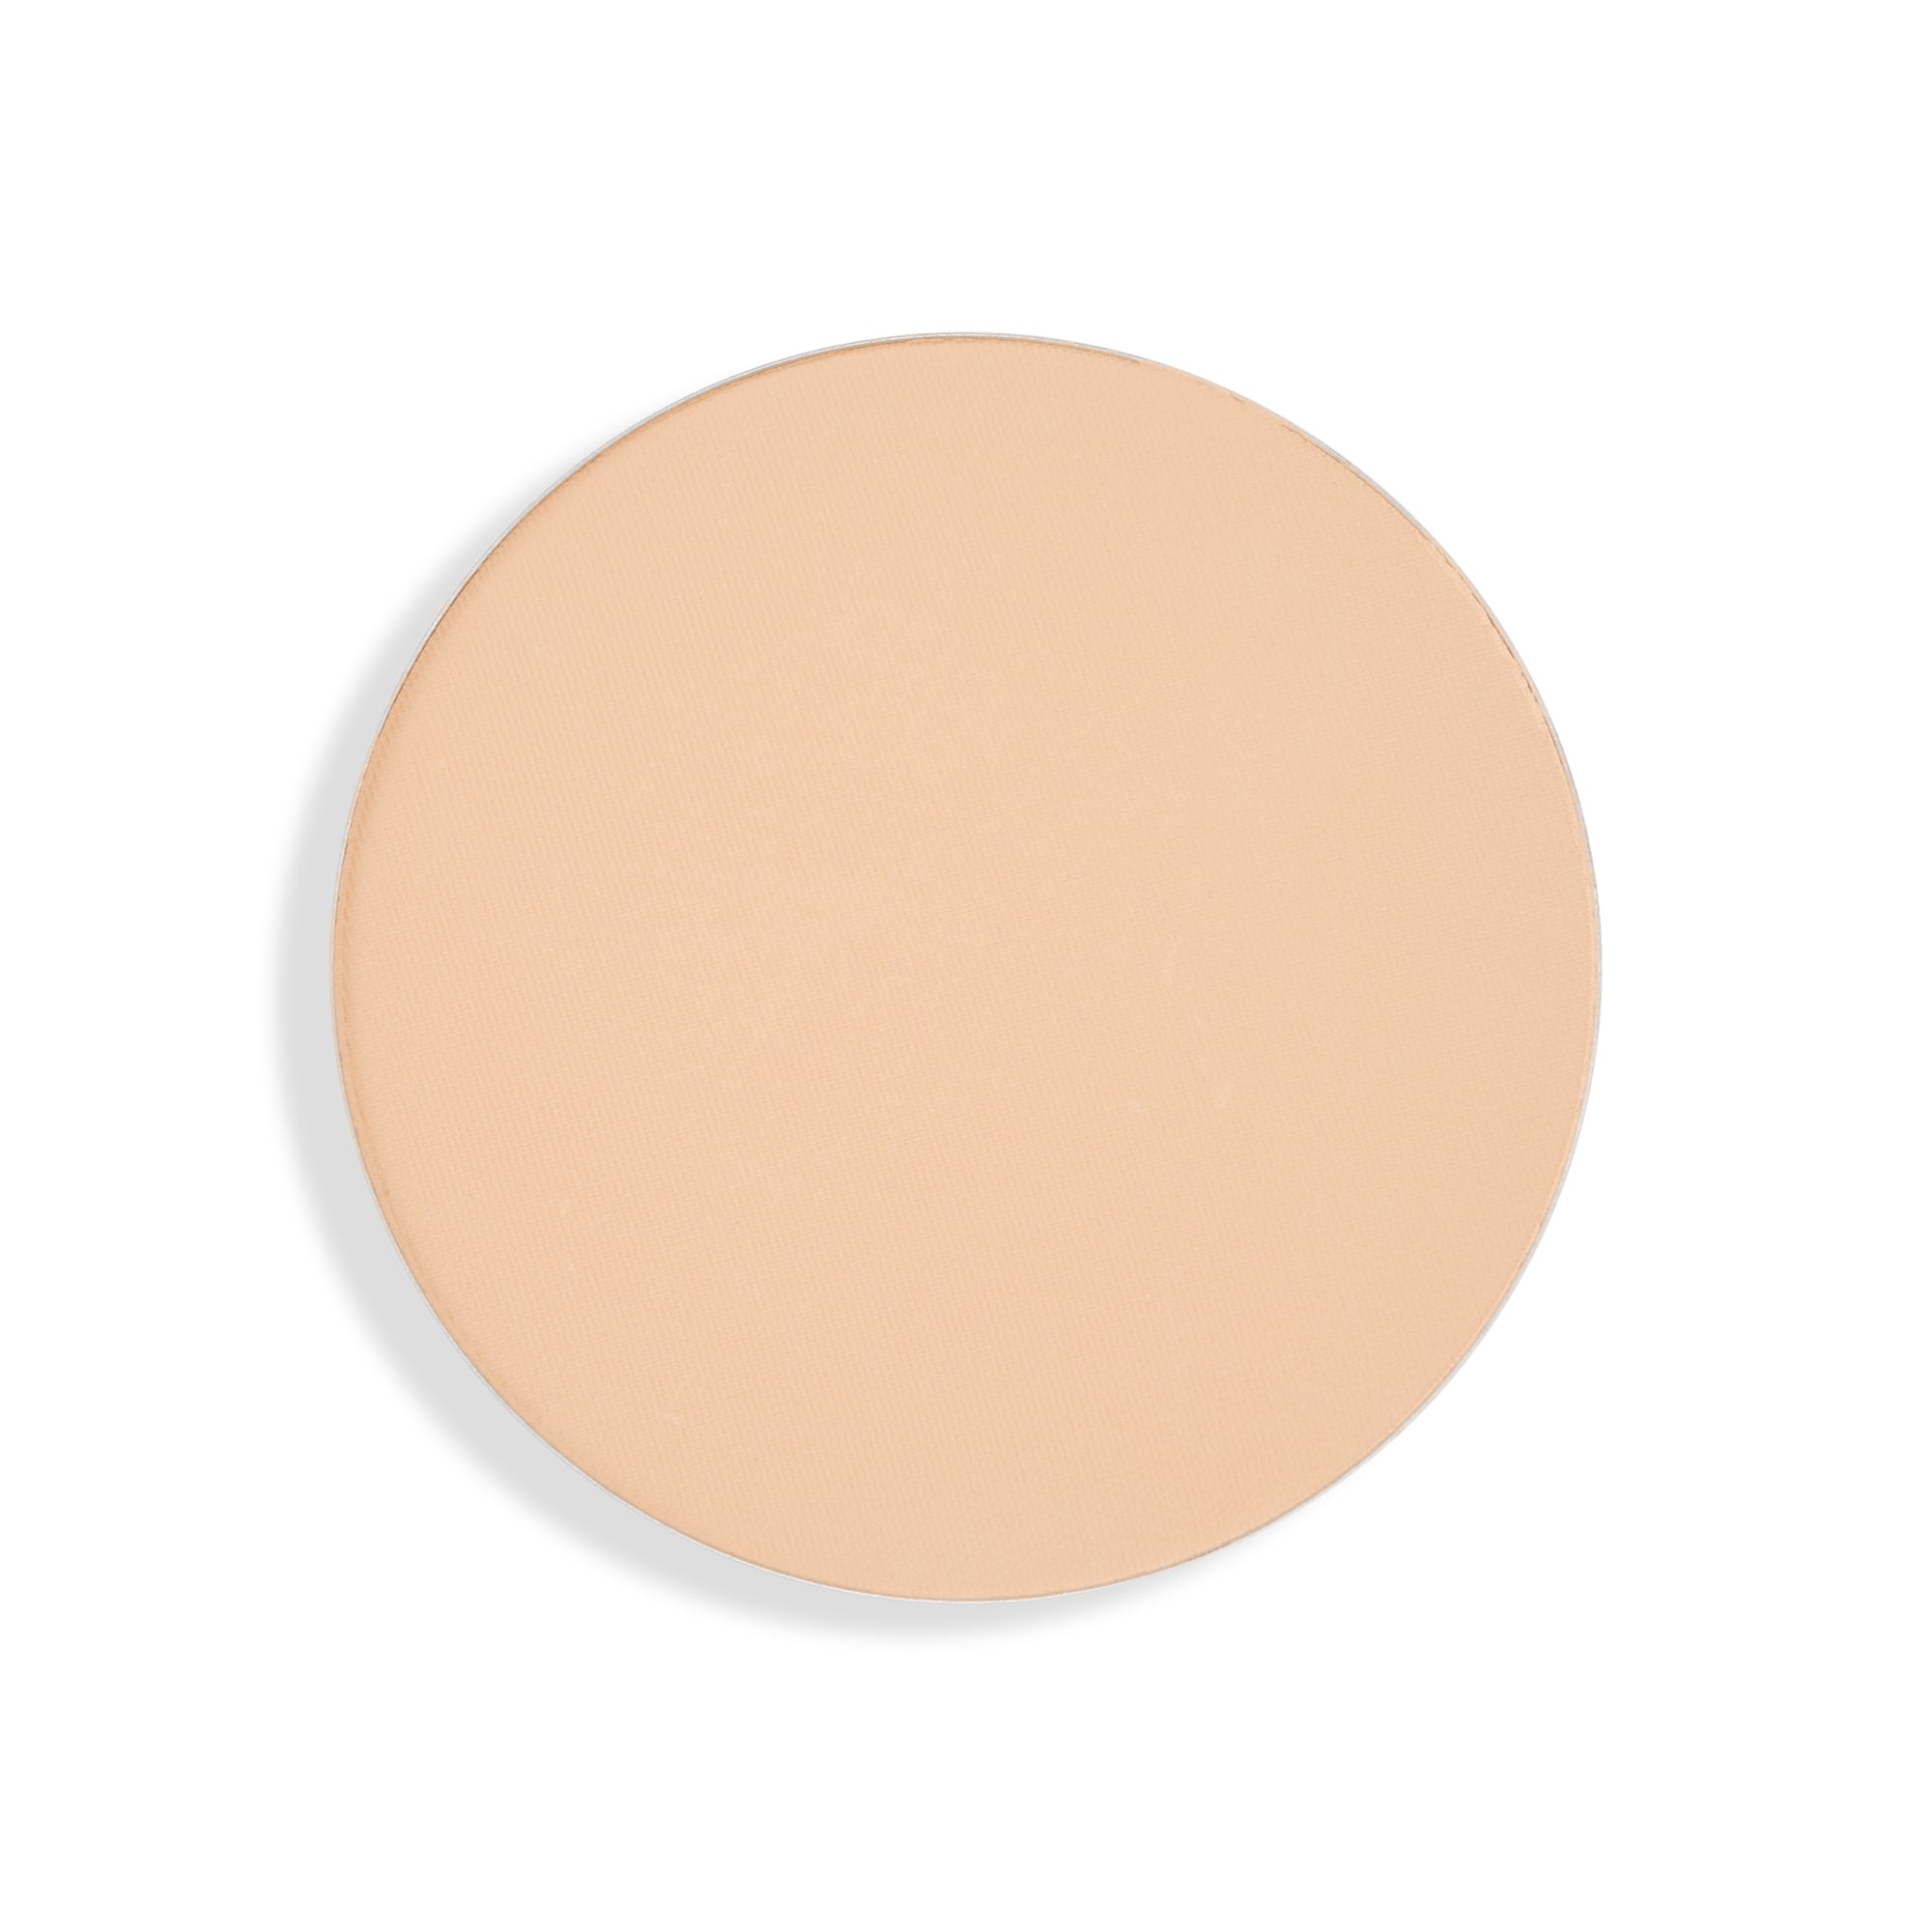 PERFECT PURISM MINERAL MAKE-UP REFILL